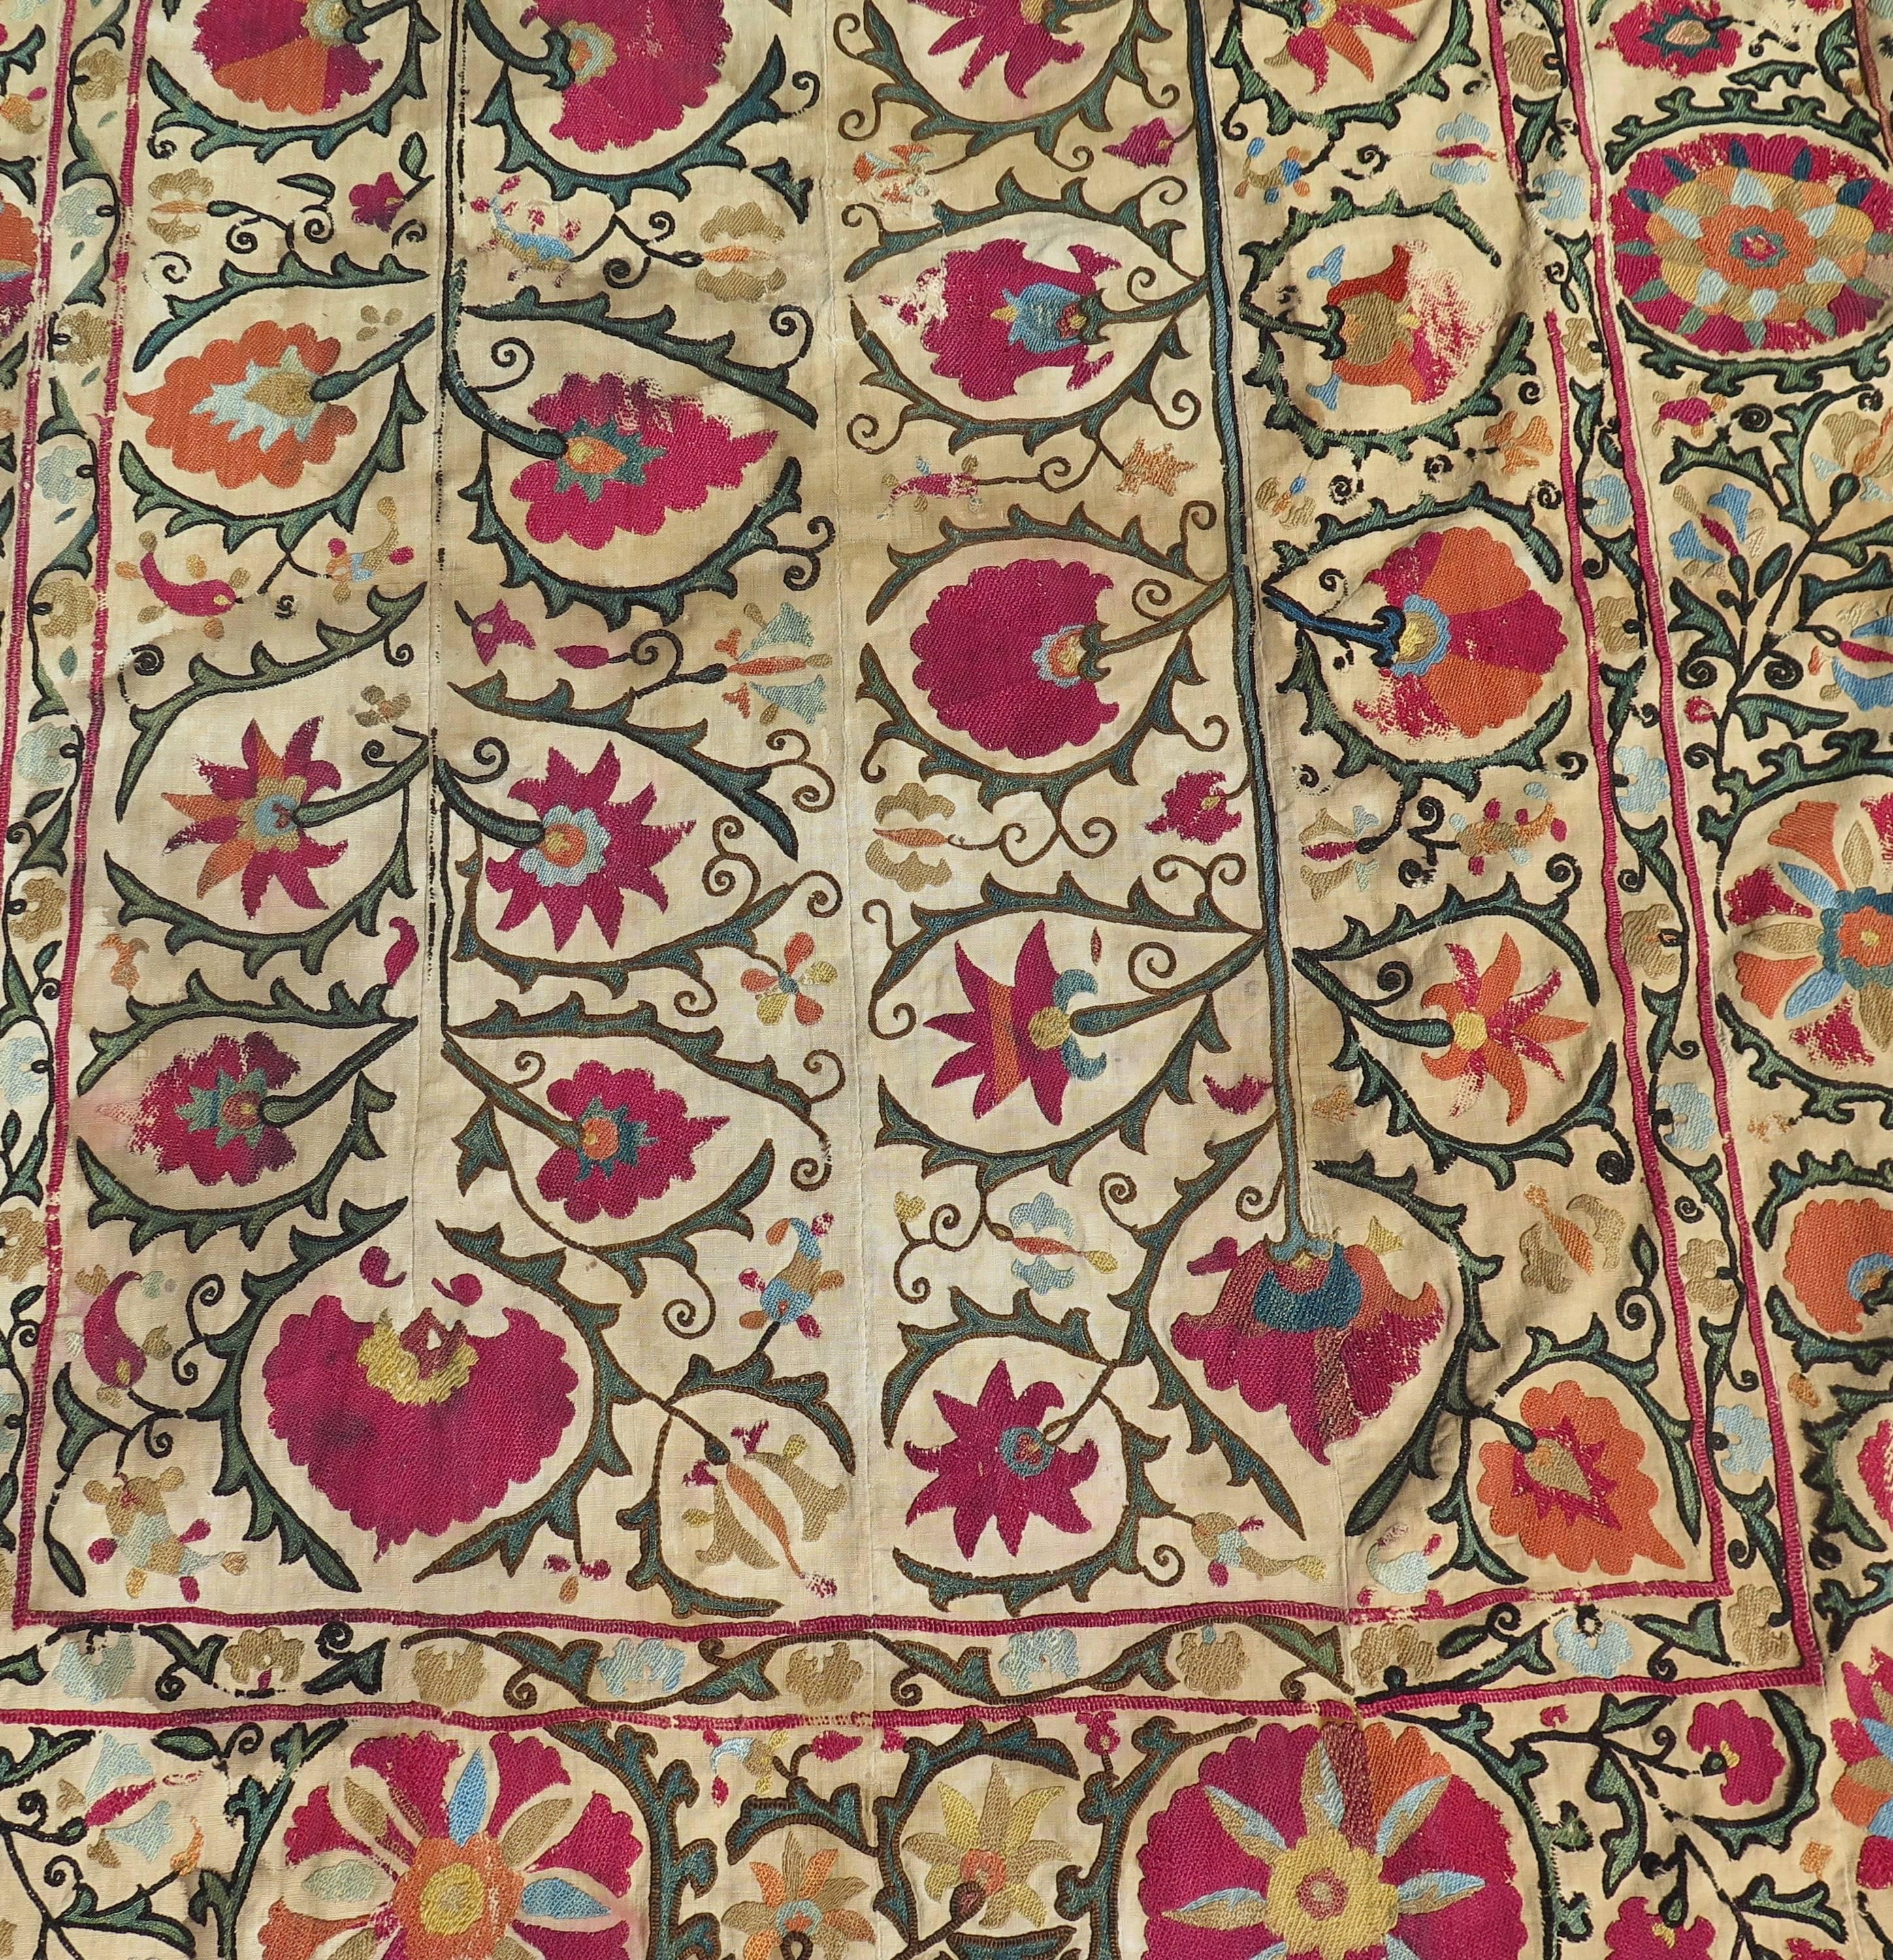 Bold flowers and vines is attributed to the city Shahrisabz, Uzbekistan. Incredible, rare example of early textile art.